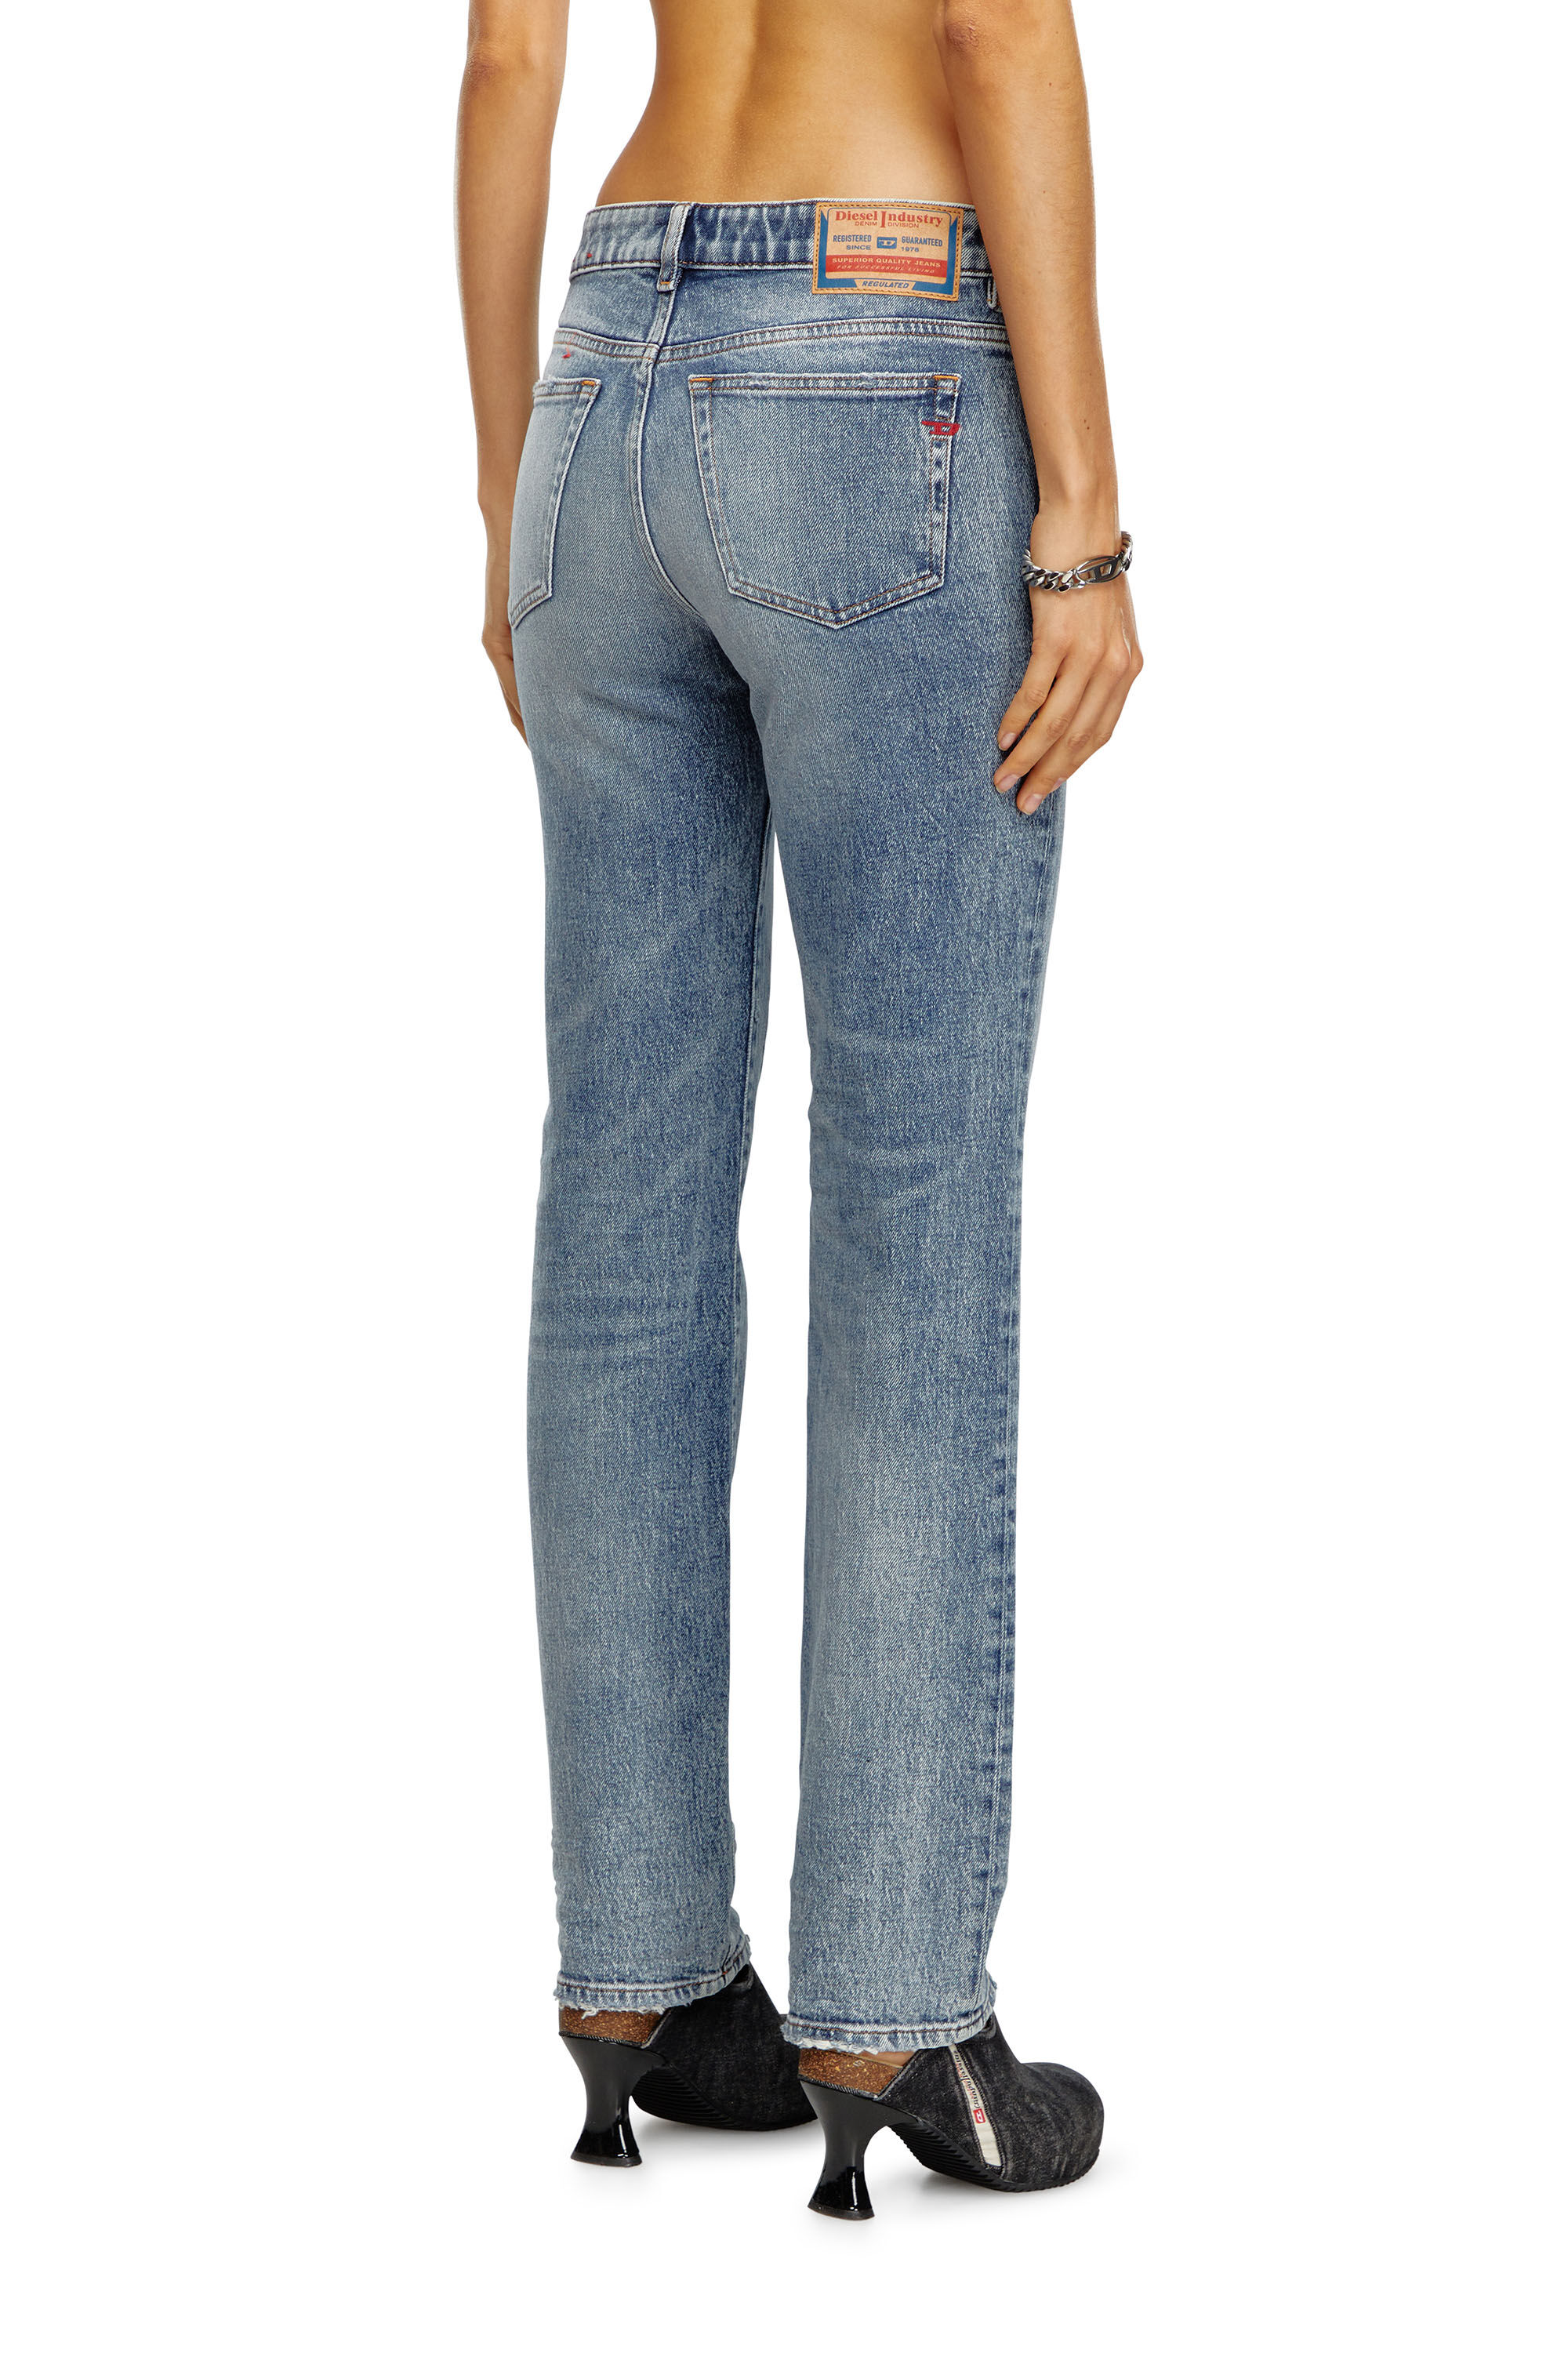 Diesel - Straight Jeans 1989 D-Mine 09J57, Mujer Straight Jeans - 1989 D-Mine in Azul marino - Image 4